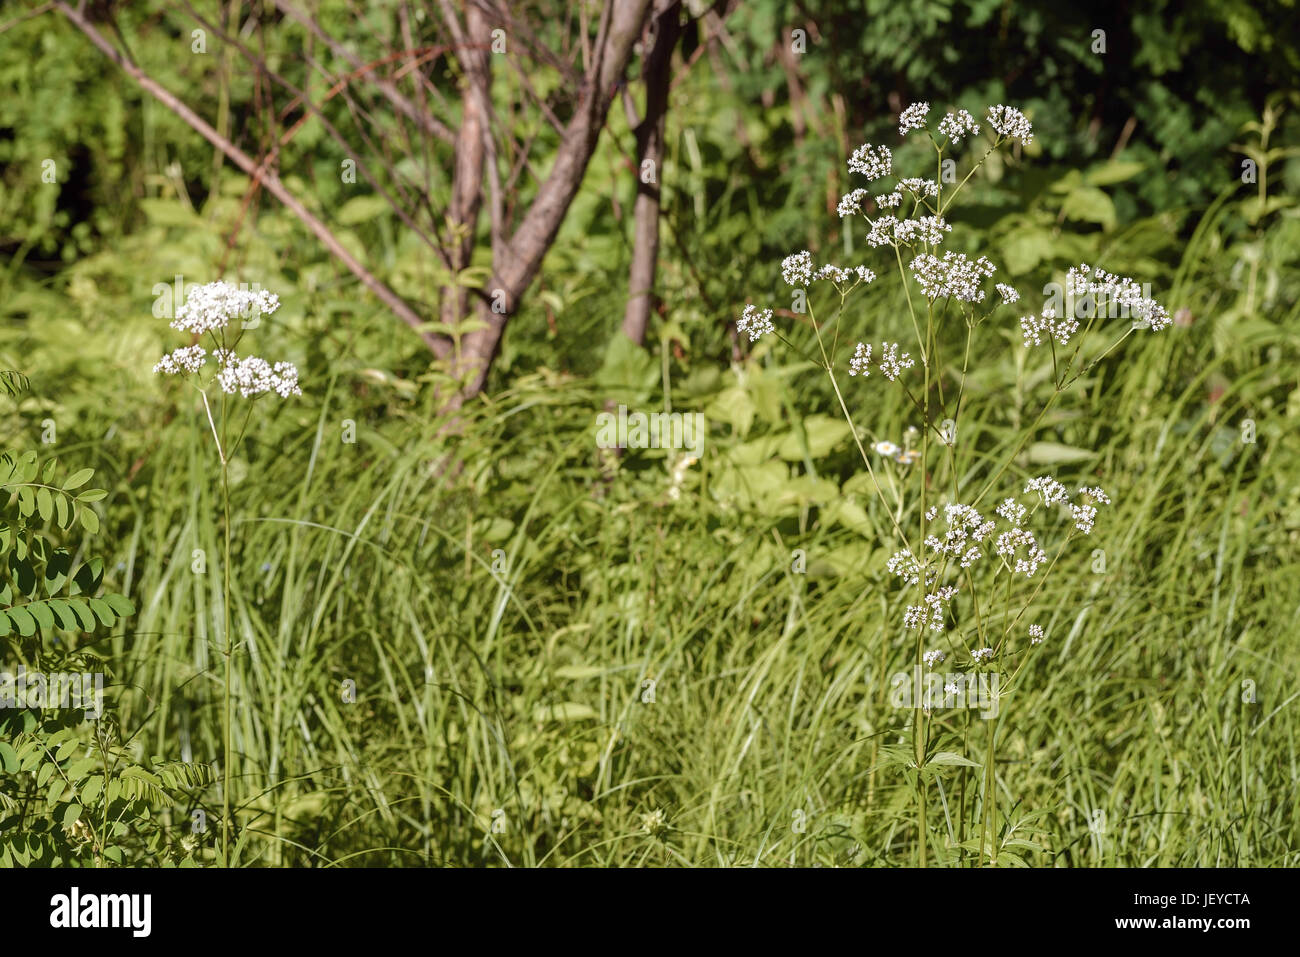 The white flowers of Valeriana officinalis grow under the summer sun in its wild natural environment Stock Photo